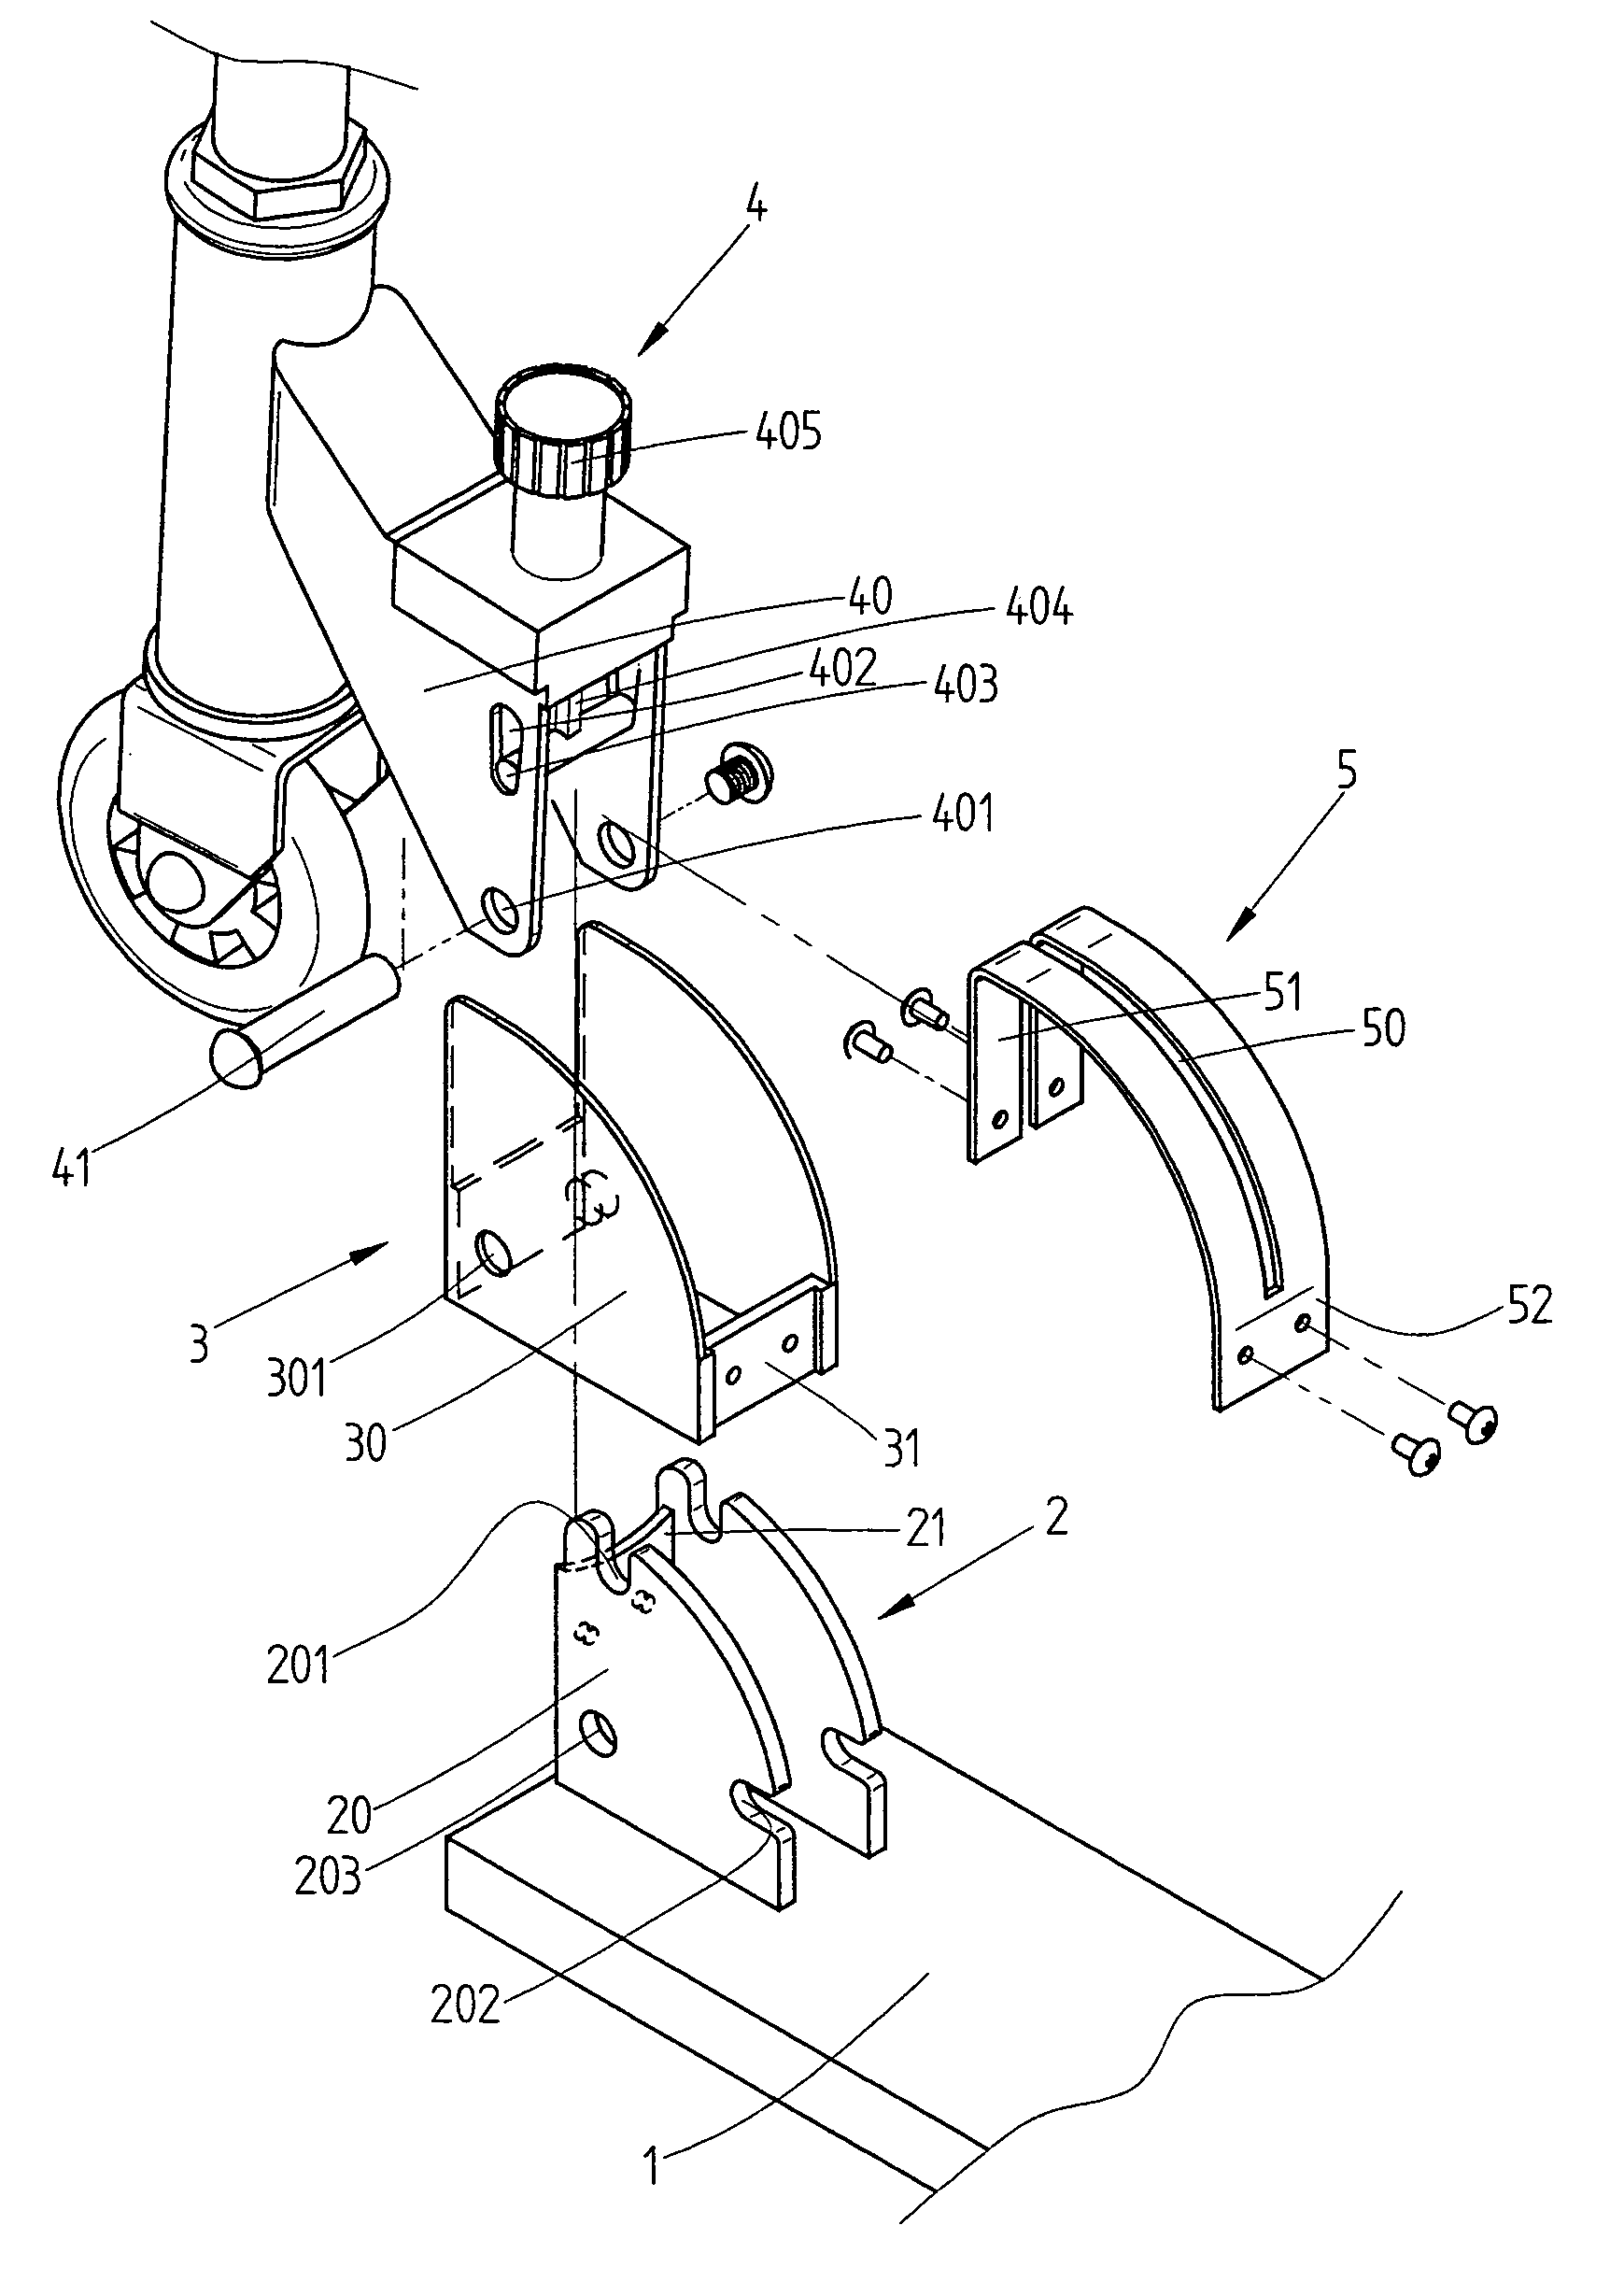 Folding device of a scooter